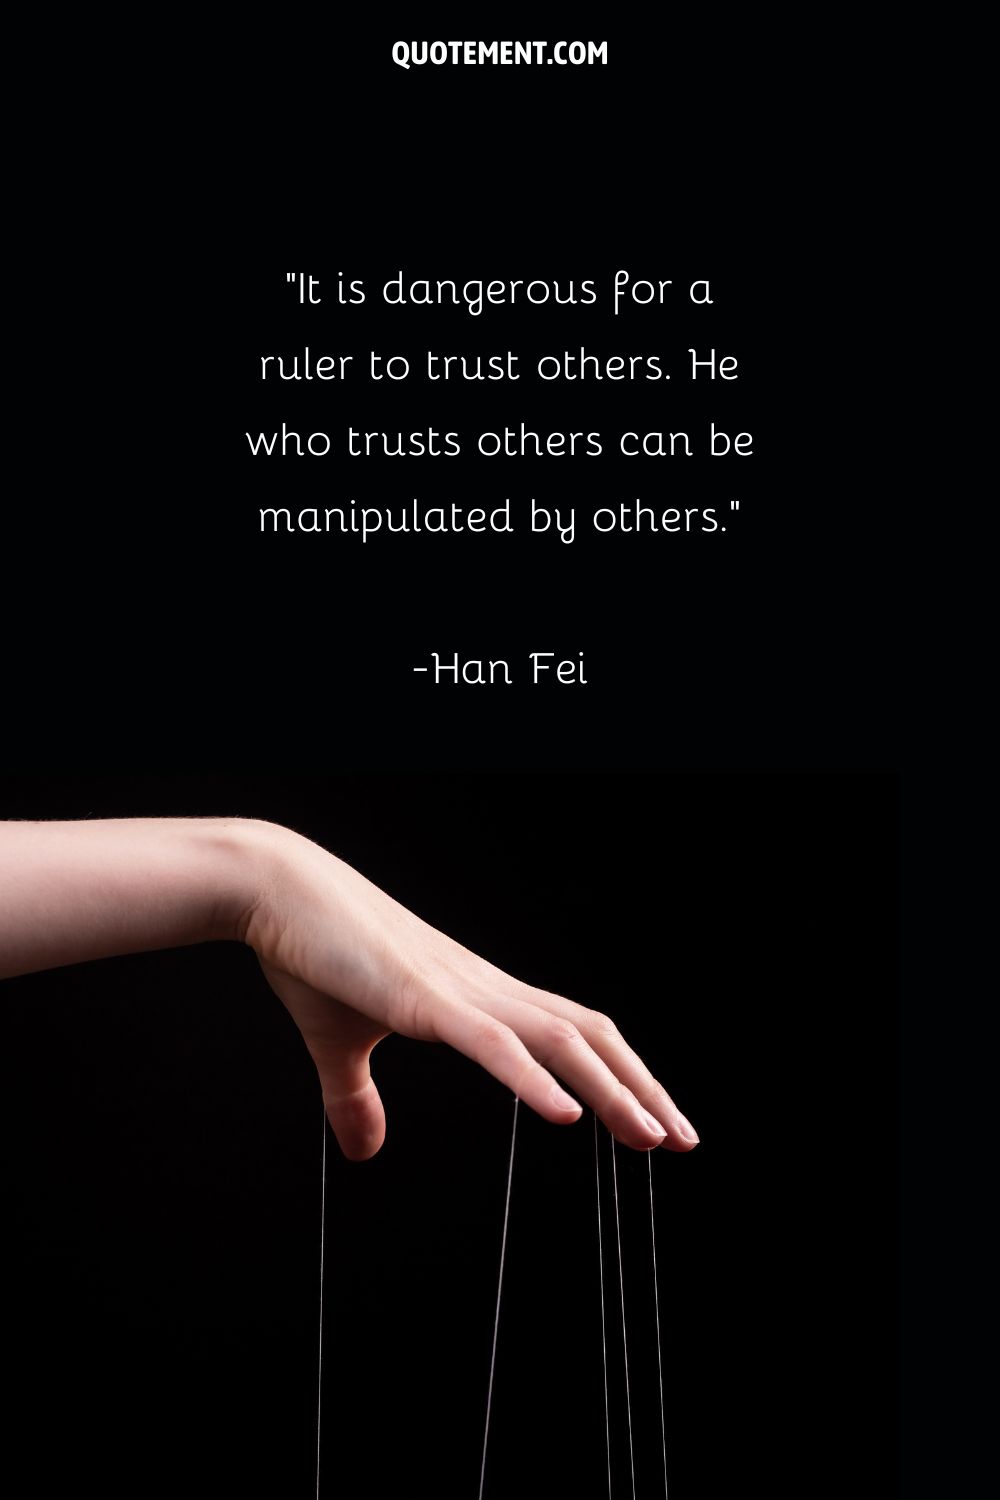 hand with strings representing quote about trust and manipulaton